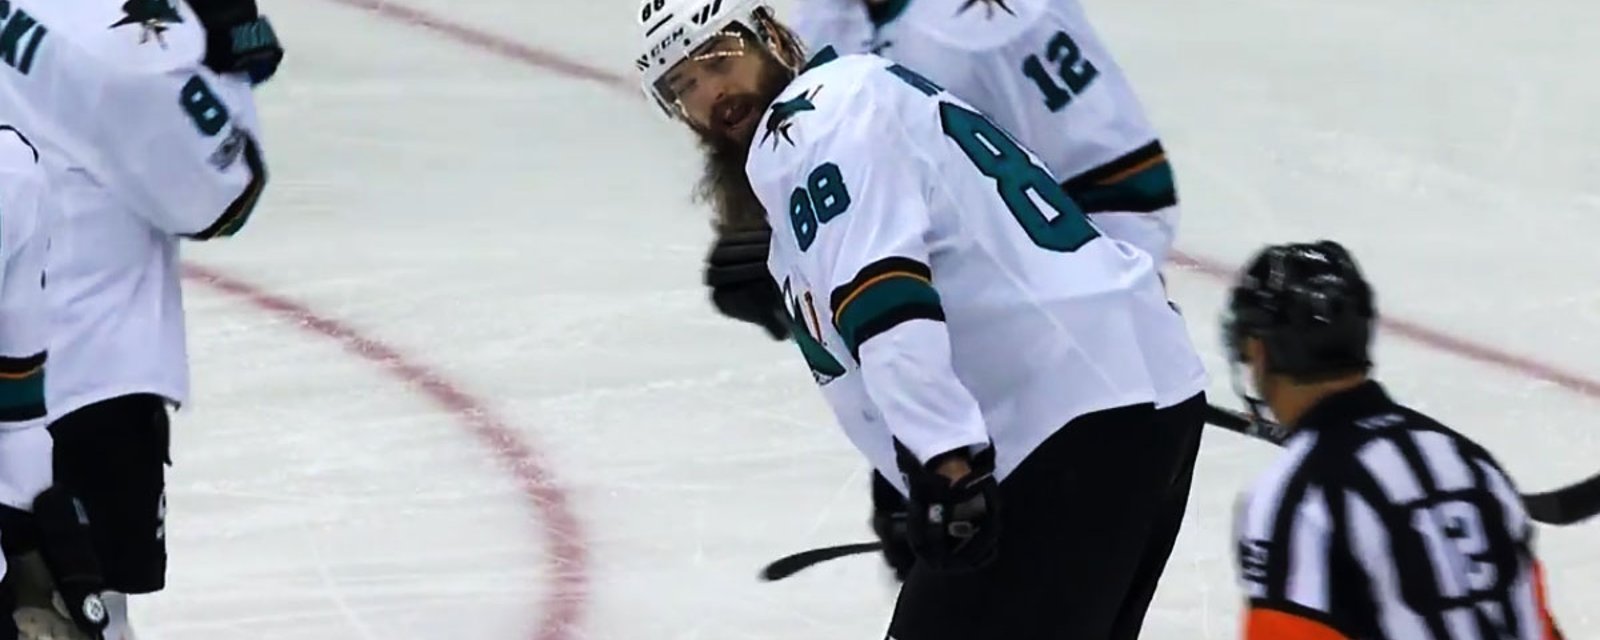 Must See: Brent Burns gives the linesman a piece of his mind!